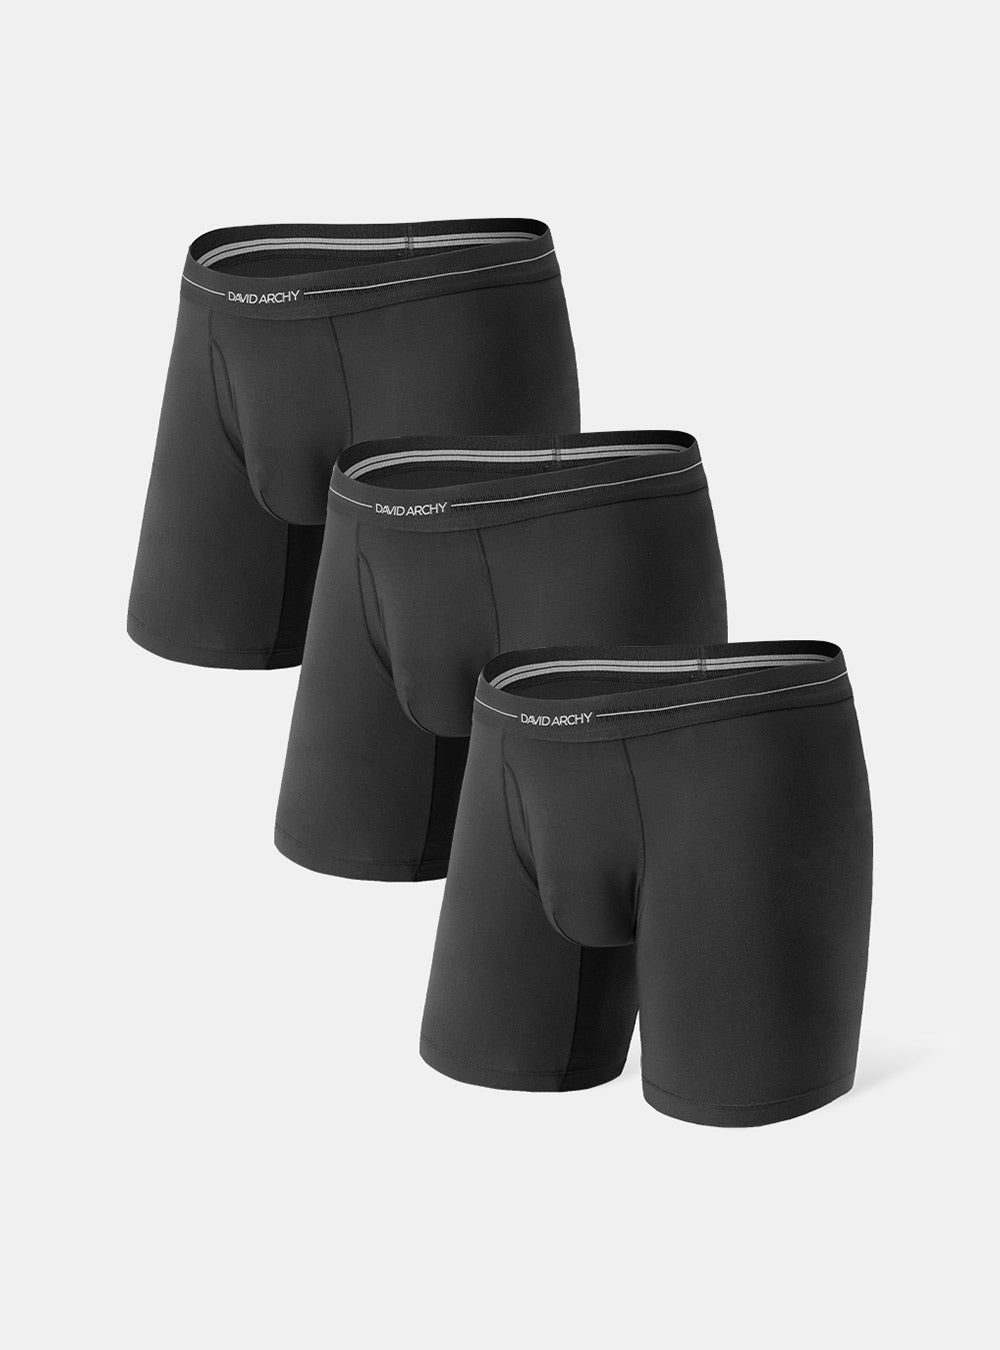 David Archy 3 Packs Boxer Briefs Bamboo Rayon Breathable Elite